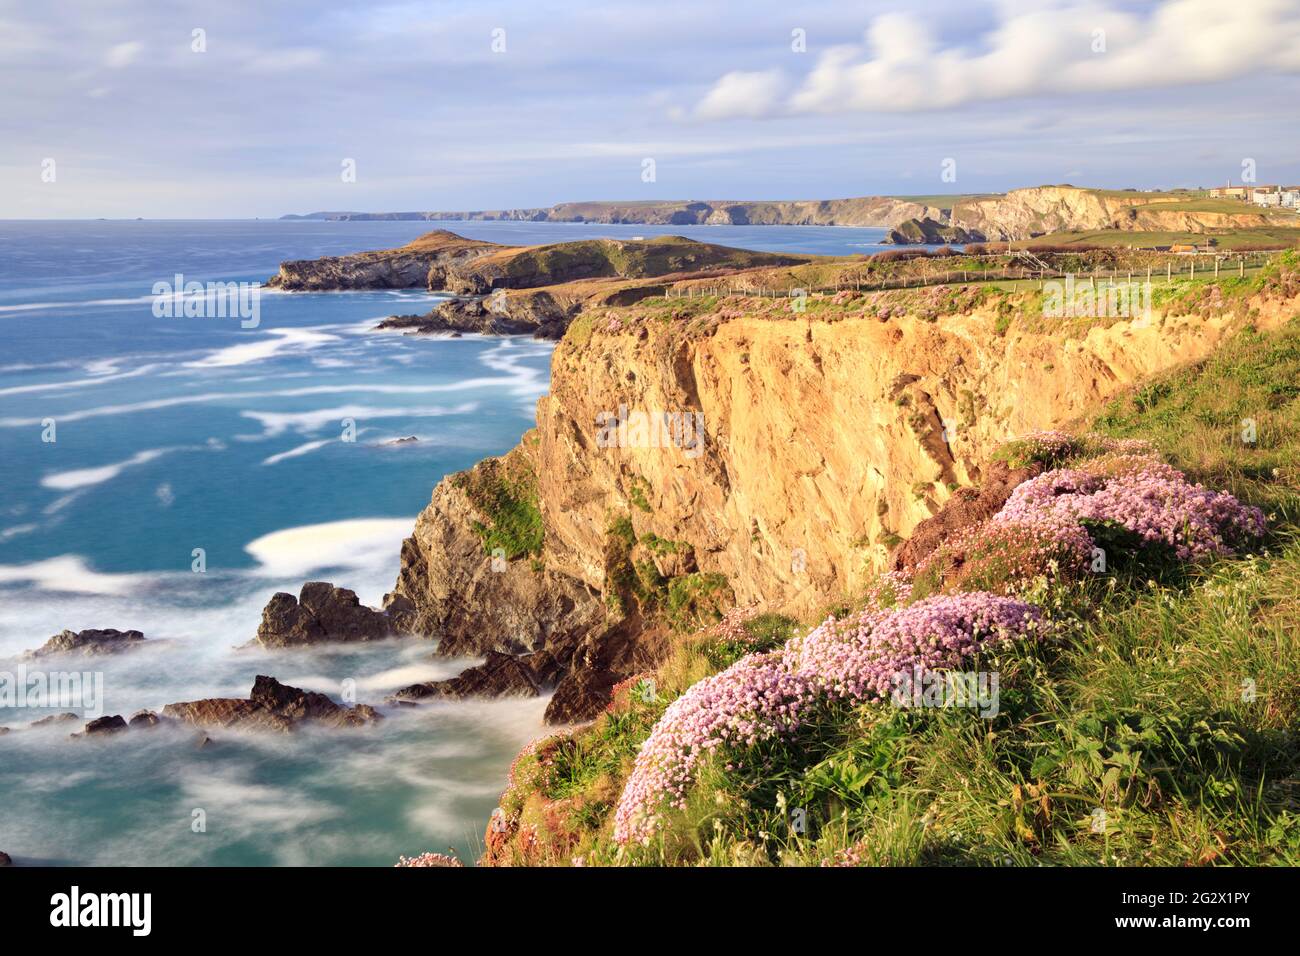 Sea thrift captured from the South West Coast Path at Newquay in Cornwall with Porth Island in the distance. Stock Photo